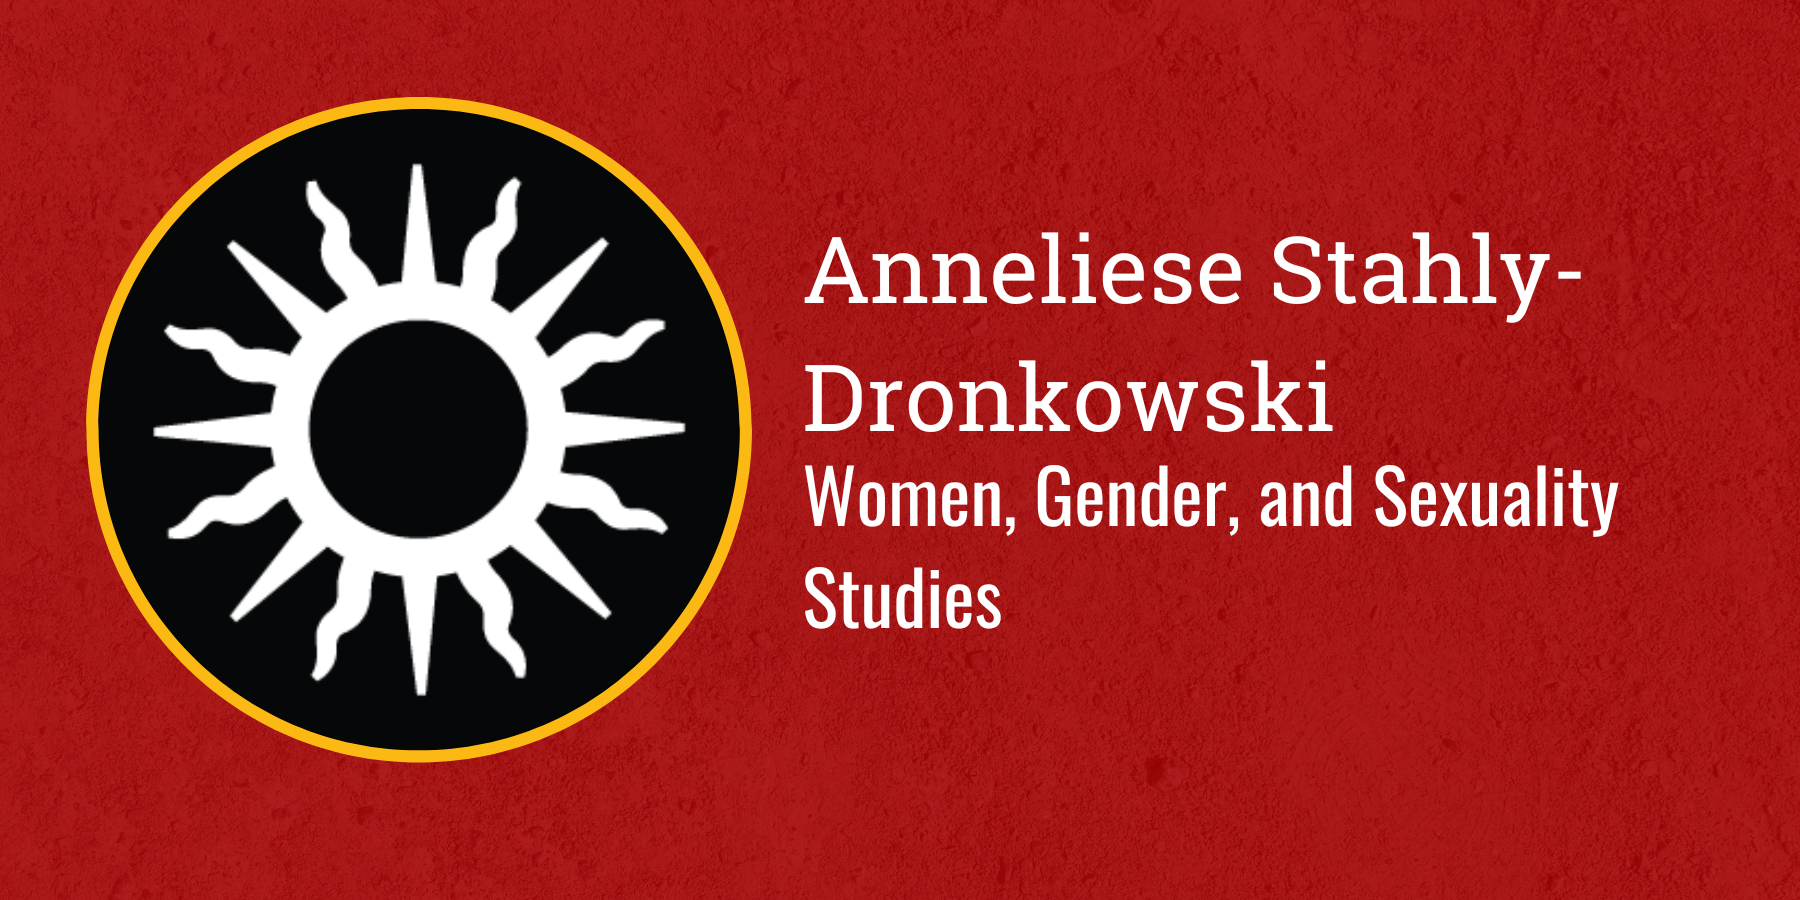 Anneliese Stahly-Dronkowski
Women, Gender, and Sexuality Studies